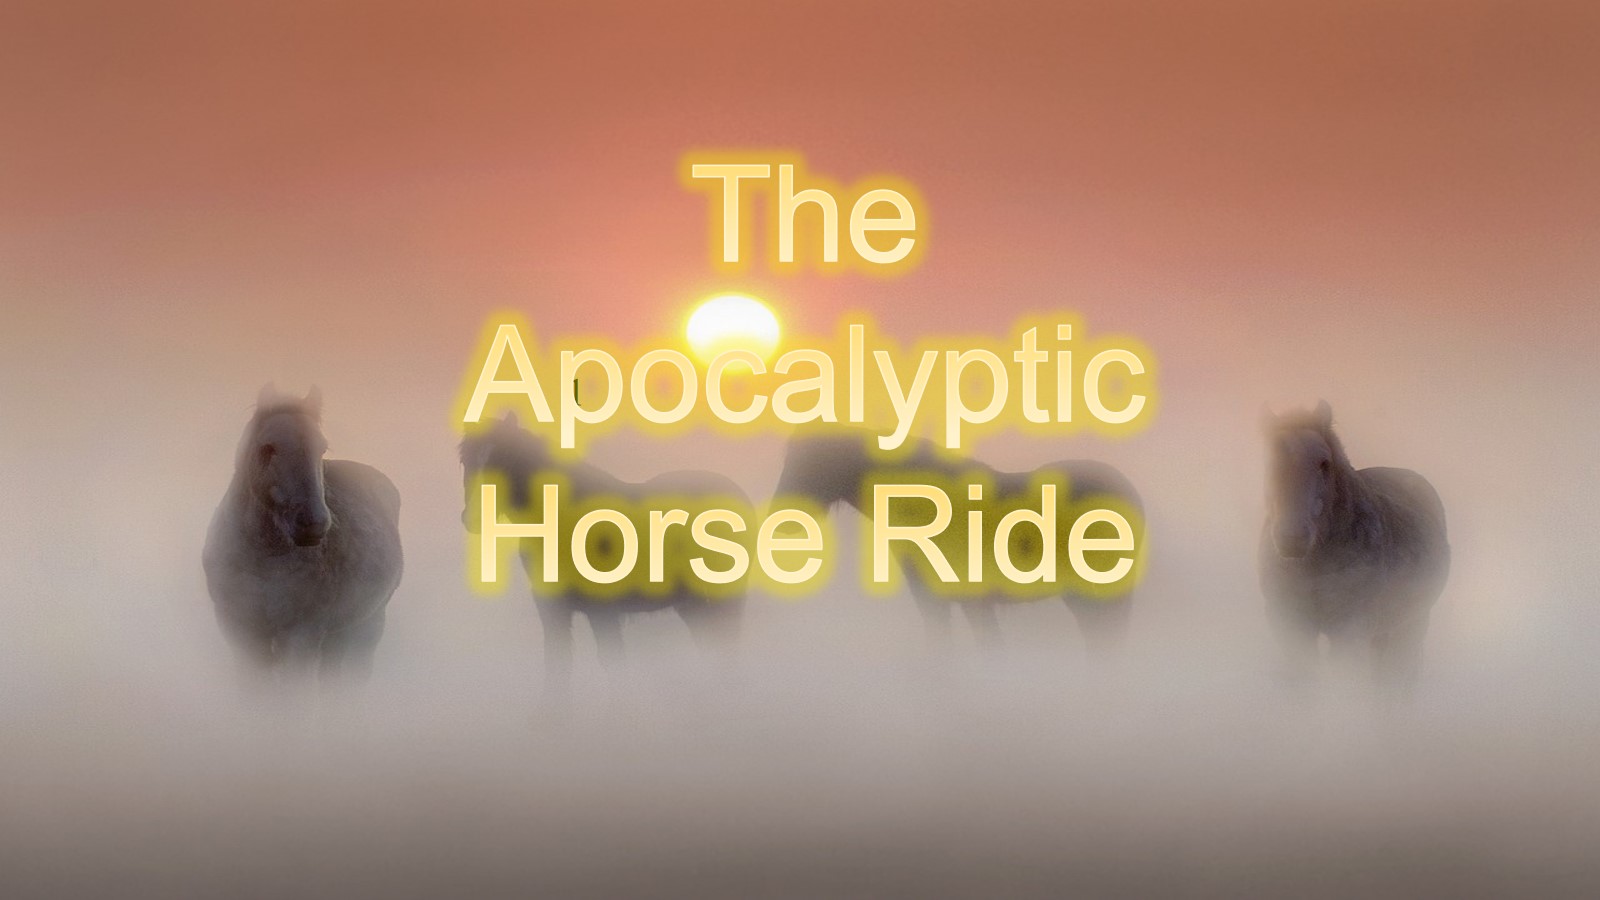 The Apocalyptic Horse Ride